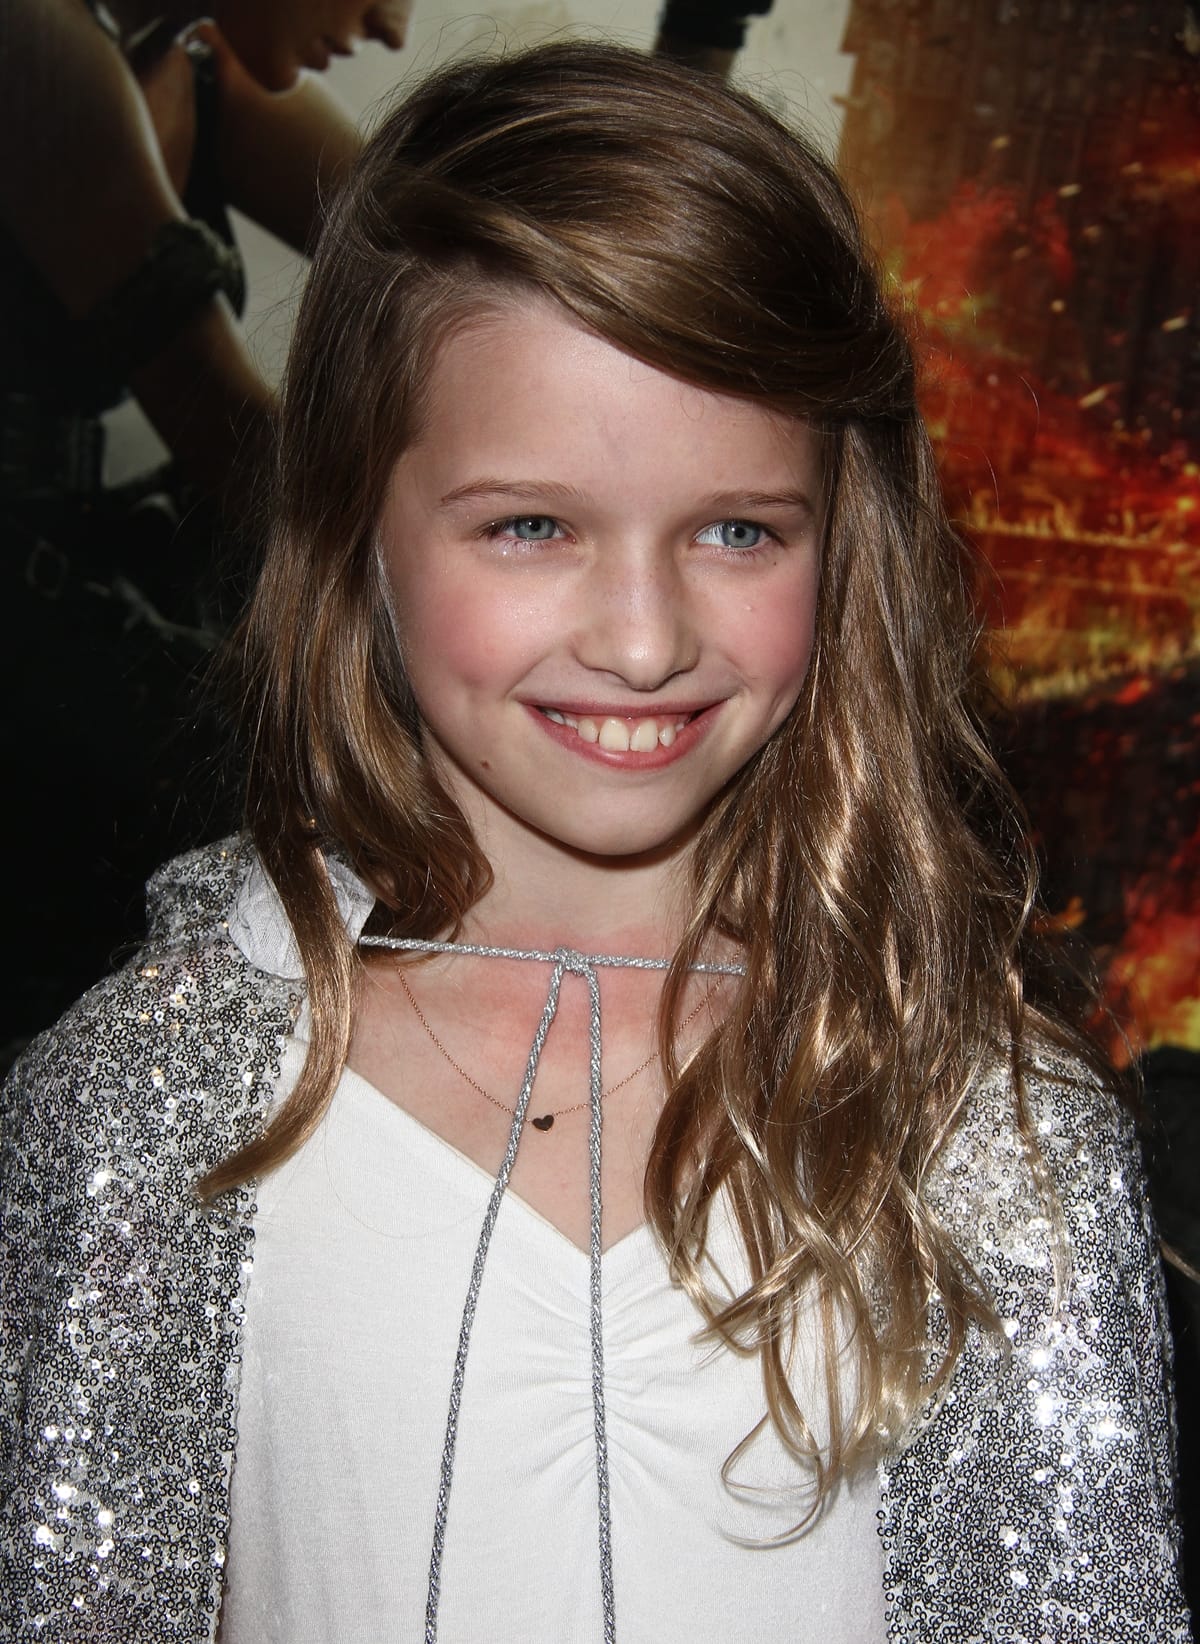 Ever Gabo Anderson played Young Alicia/Red Queen in the 2016 science fiction action film Resident Evil: The Final Chapter and was 9 years old when attending the premiere